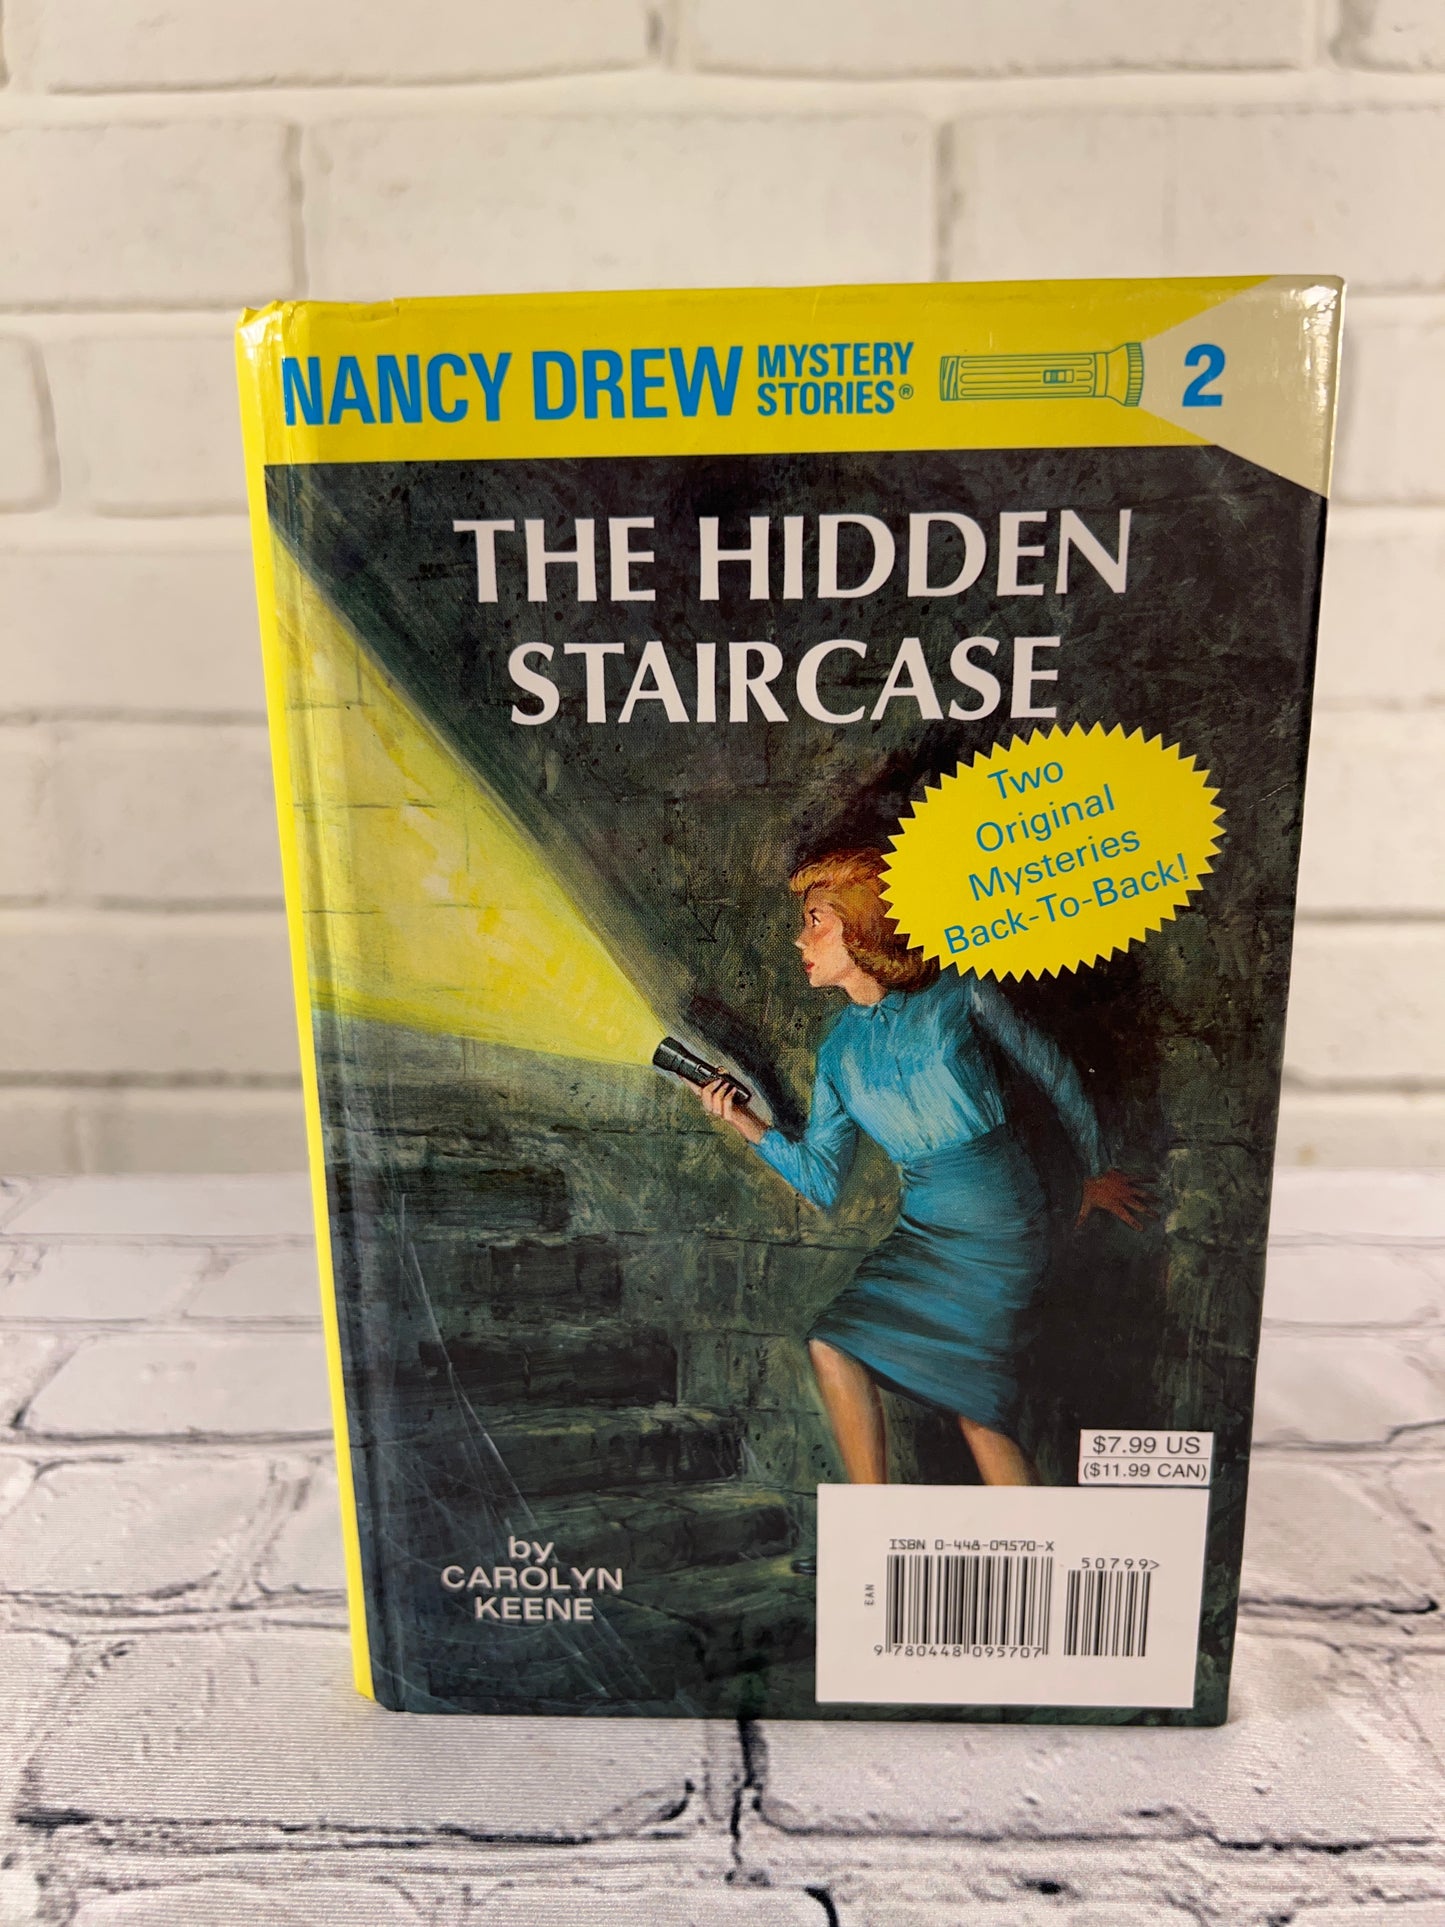 1. & 2. The Secret of the Old Clock/The Hidden Staircase by Carolyn Keene [2002 · Nancy Drew]